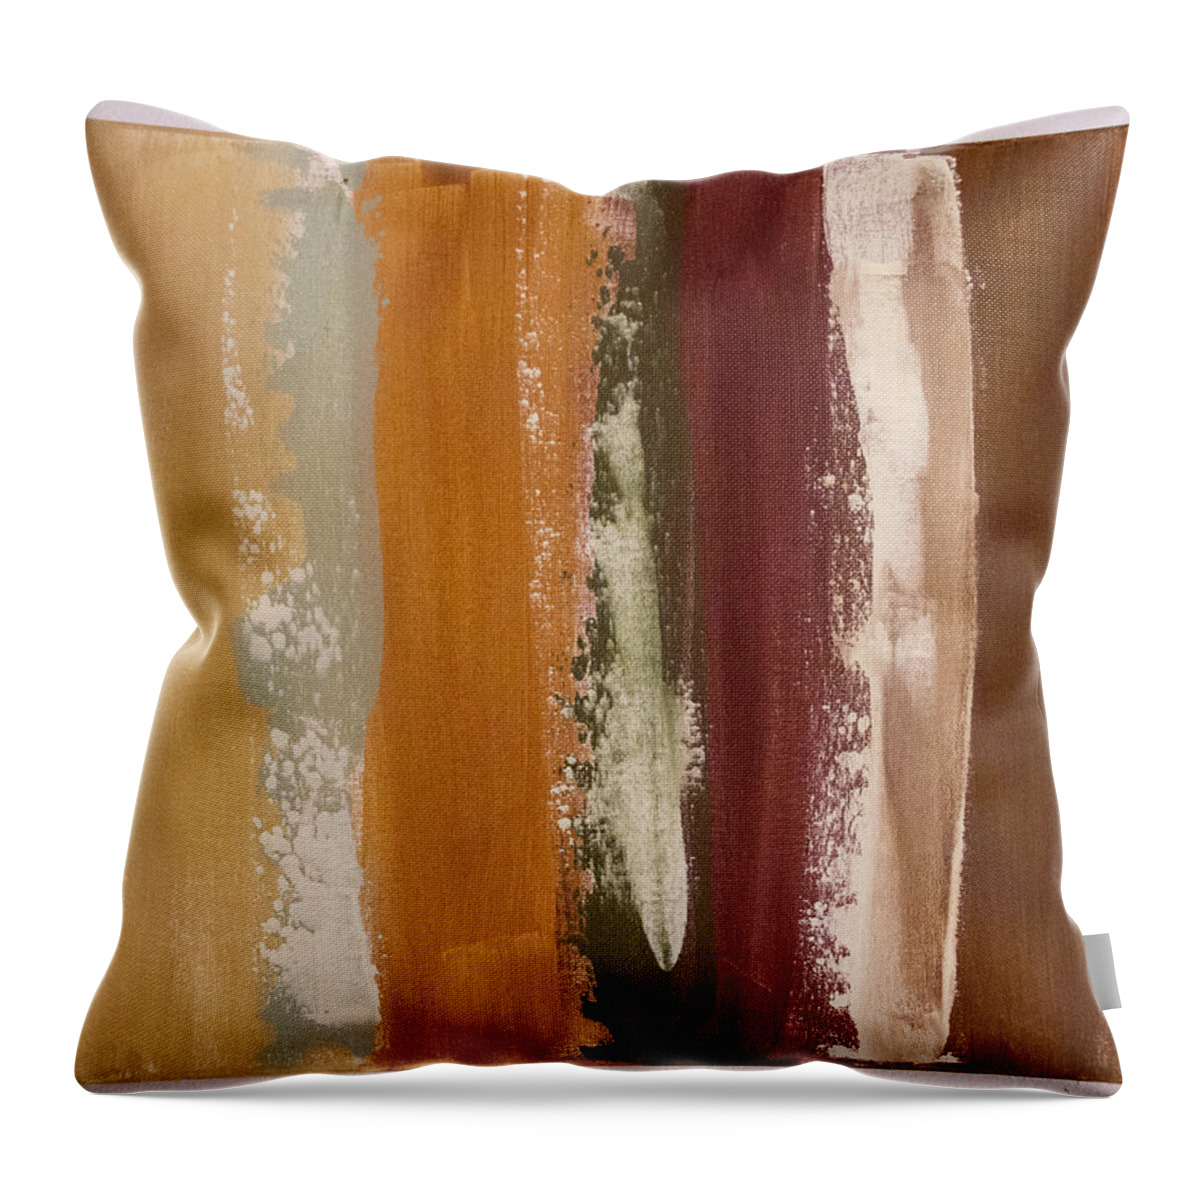 Autumn Throw Pillow featuring the painting Autumn by Jacie Garcia 